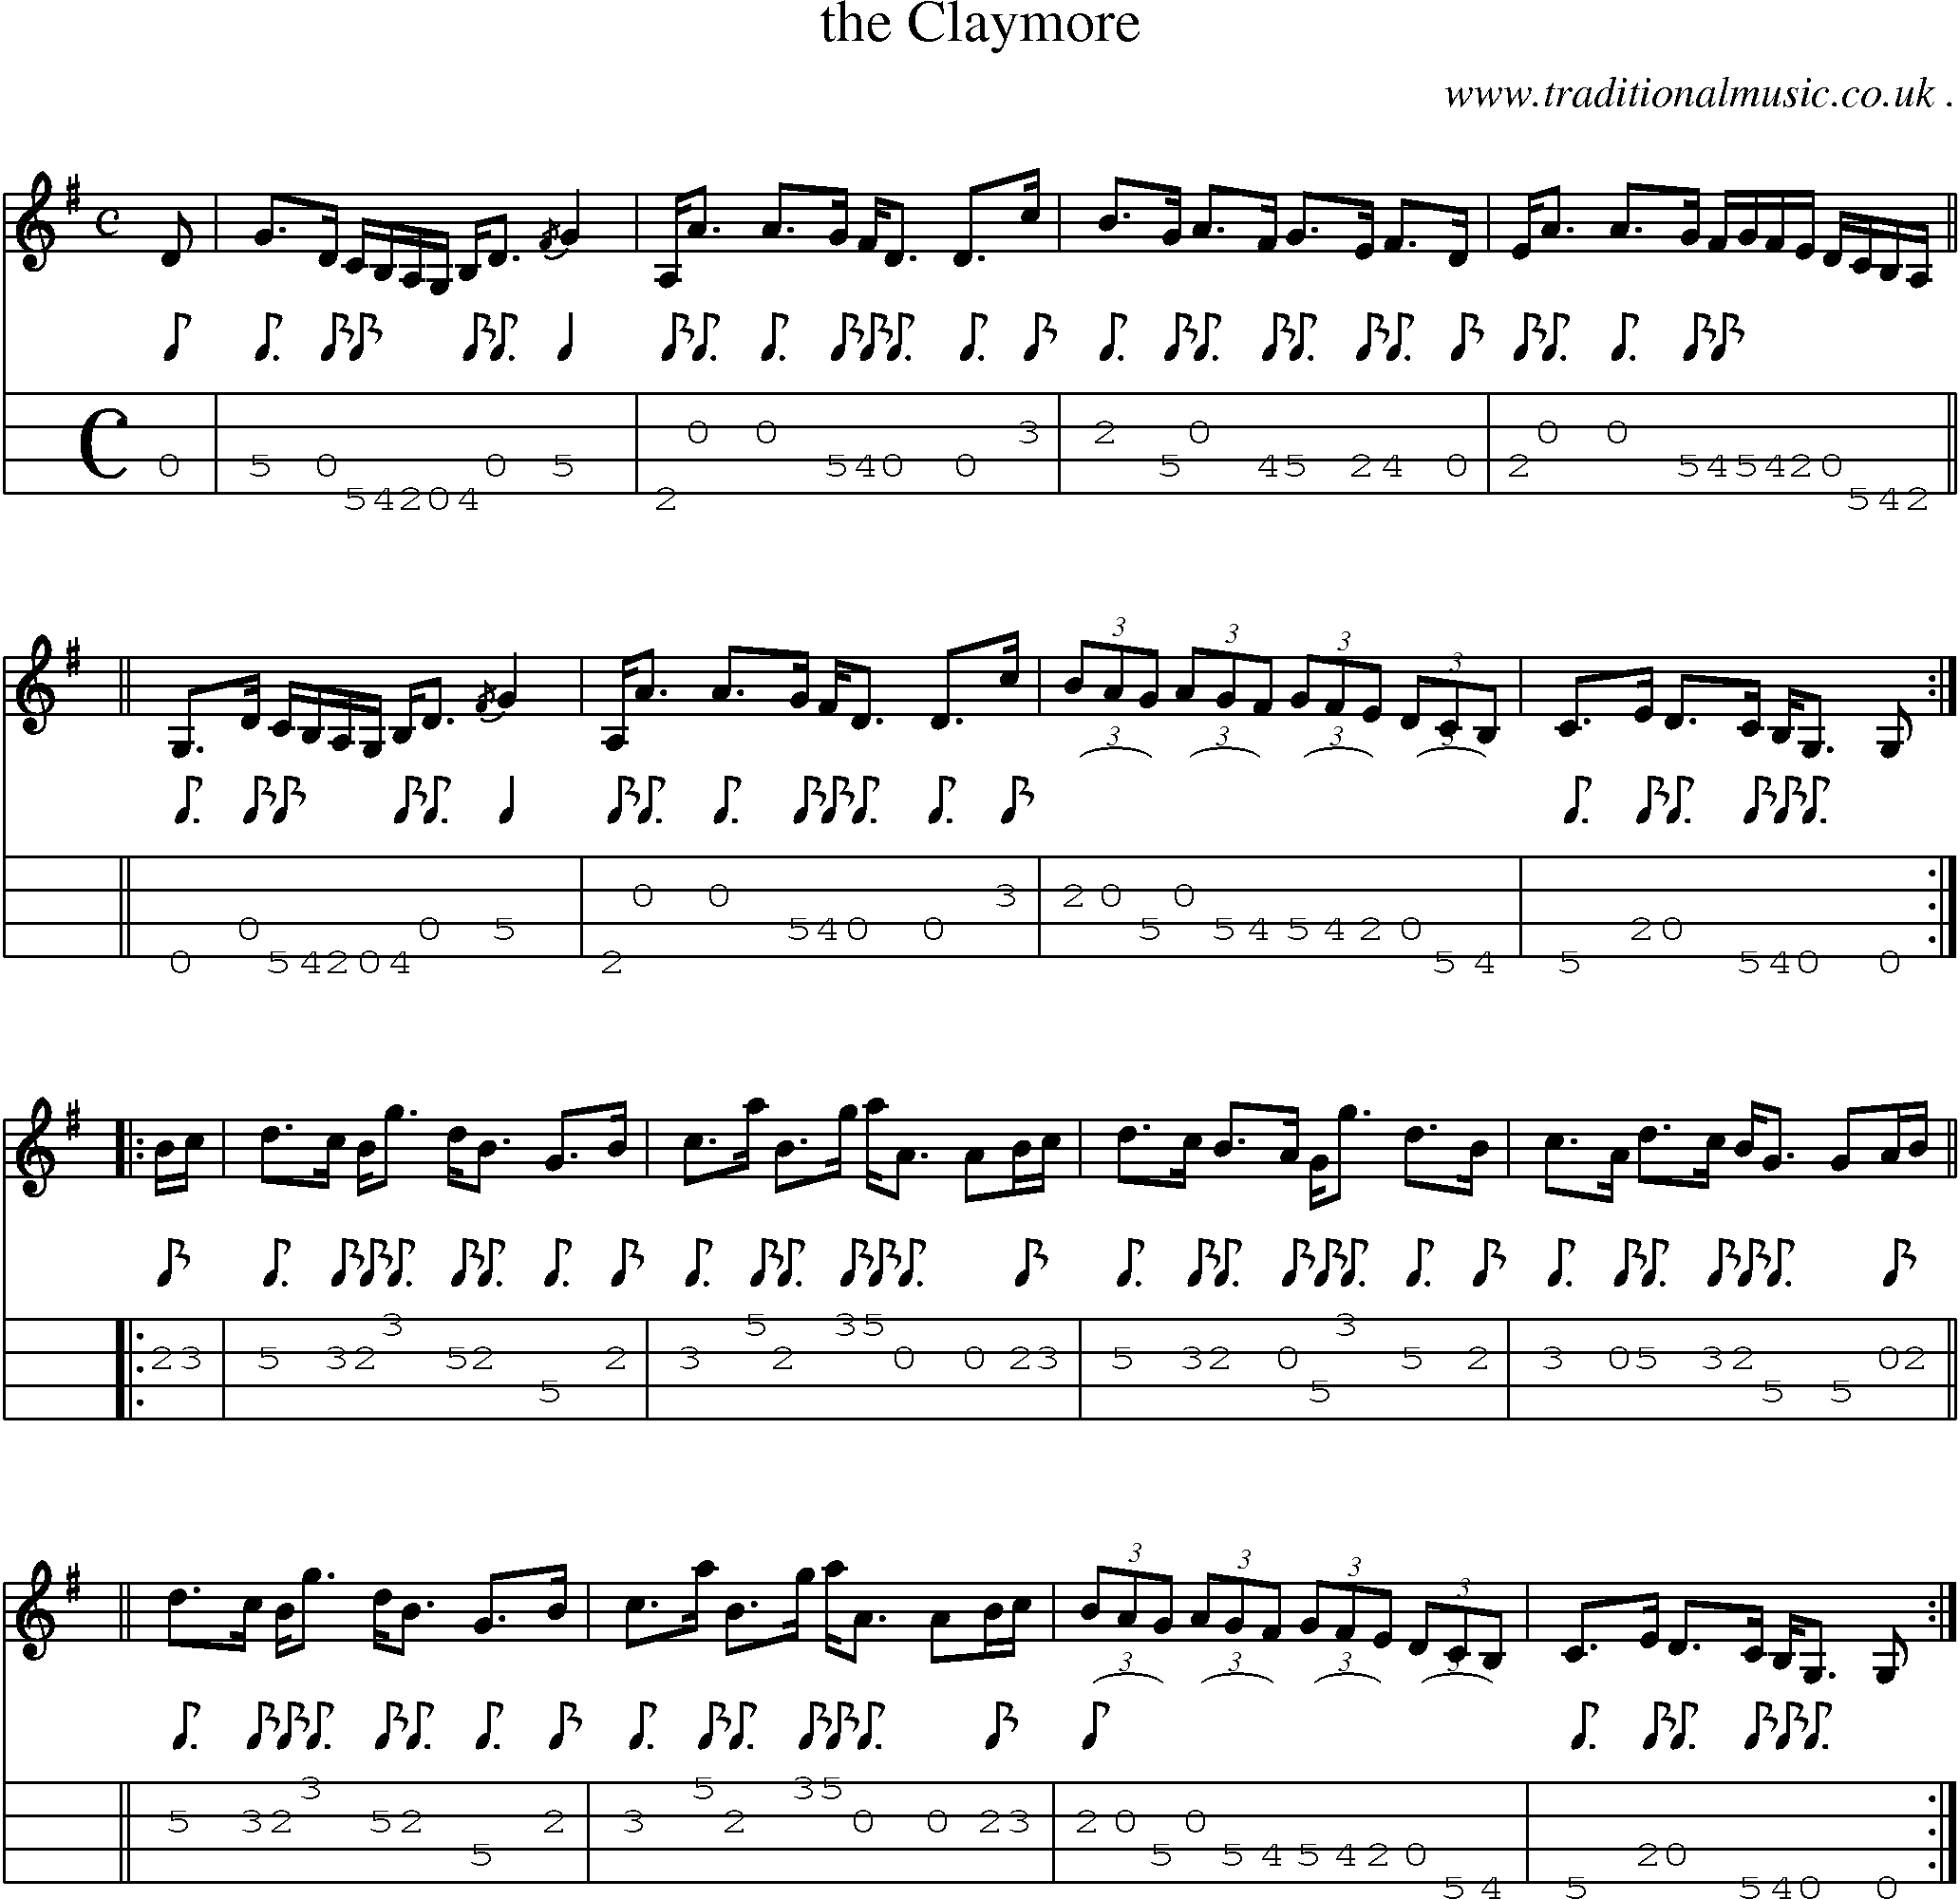 Sheet-music  score, Chords and Mandolin Tabs for The Claymore